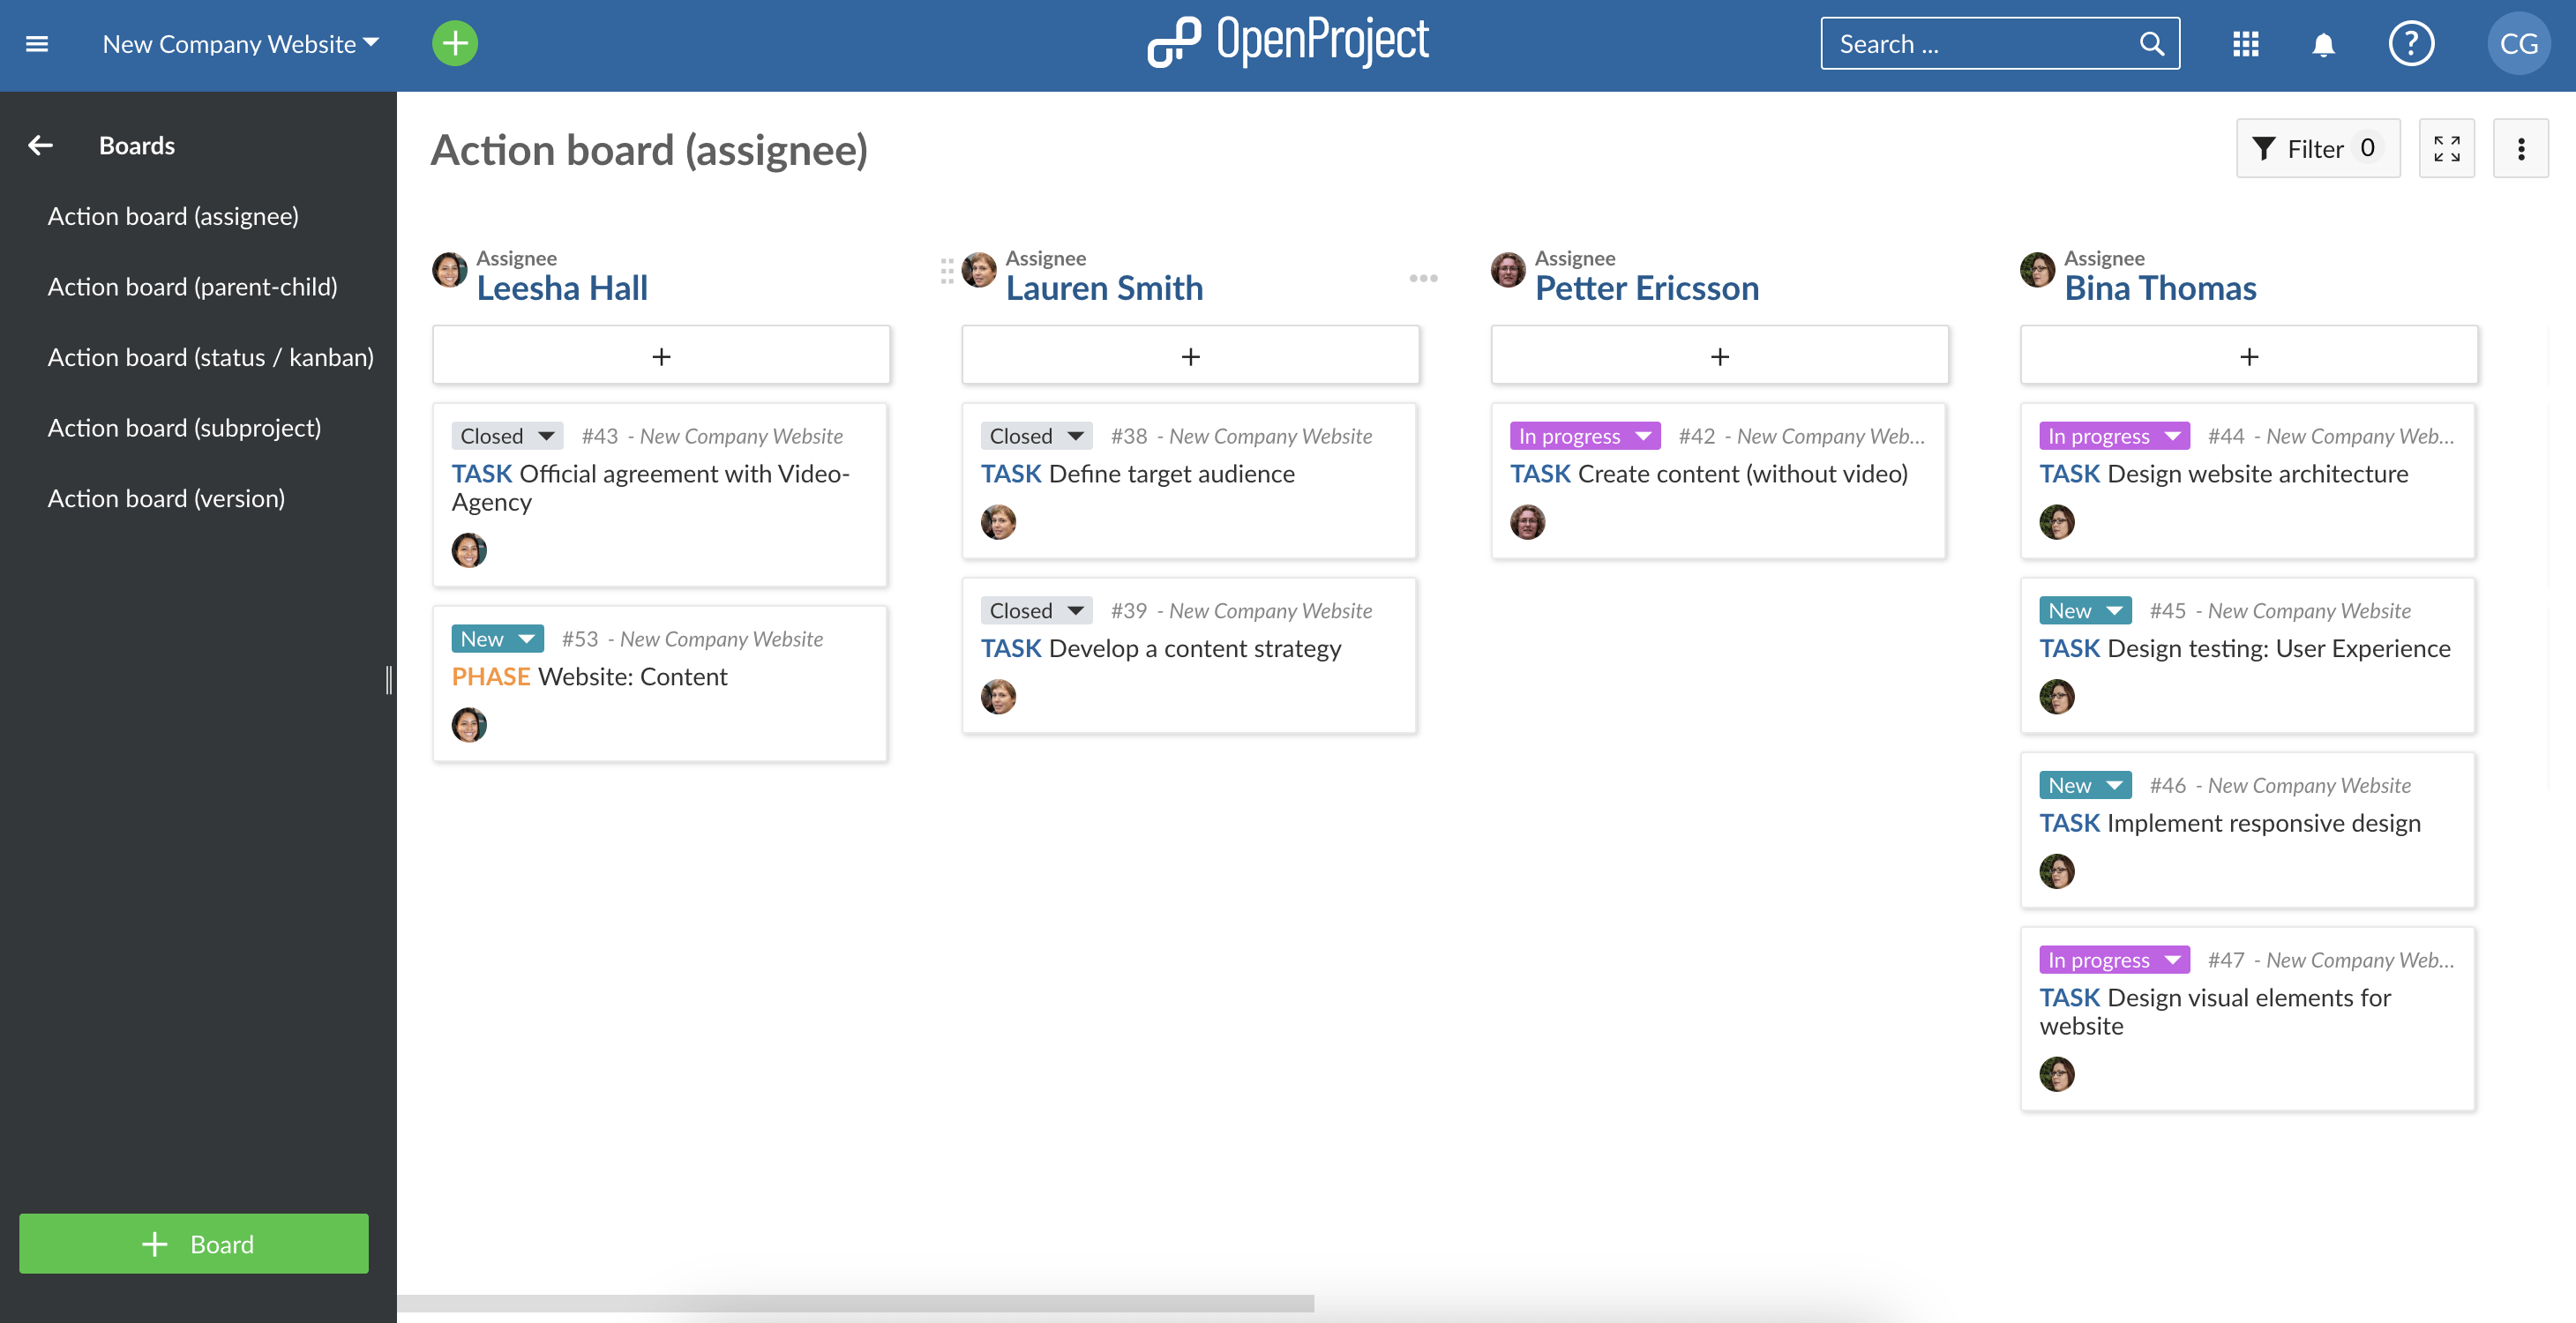 Agile Action Board of type Assignee